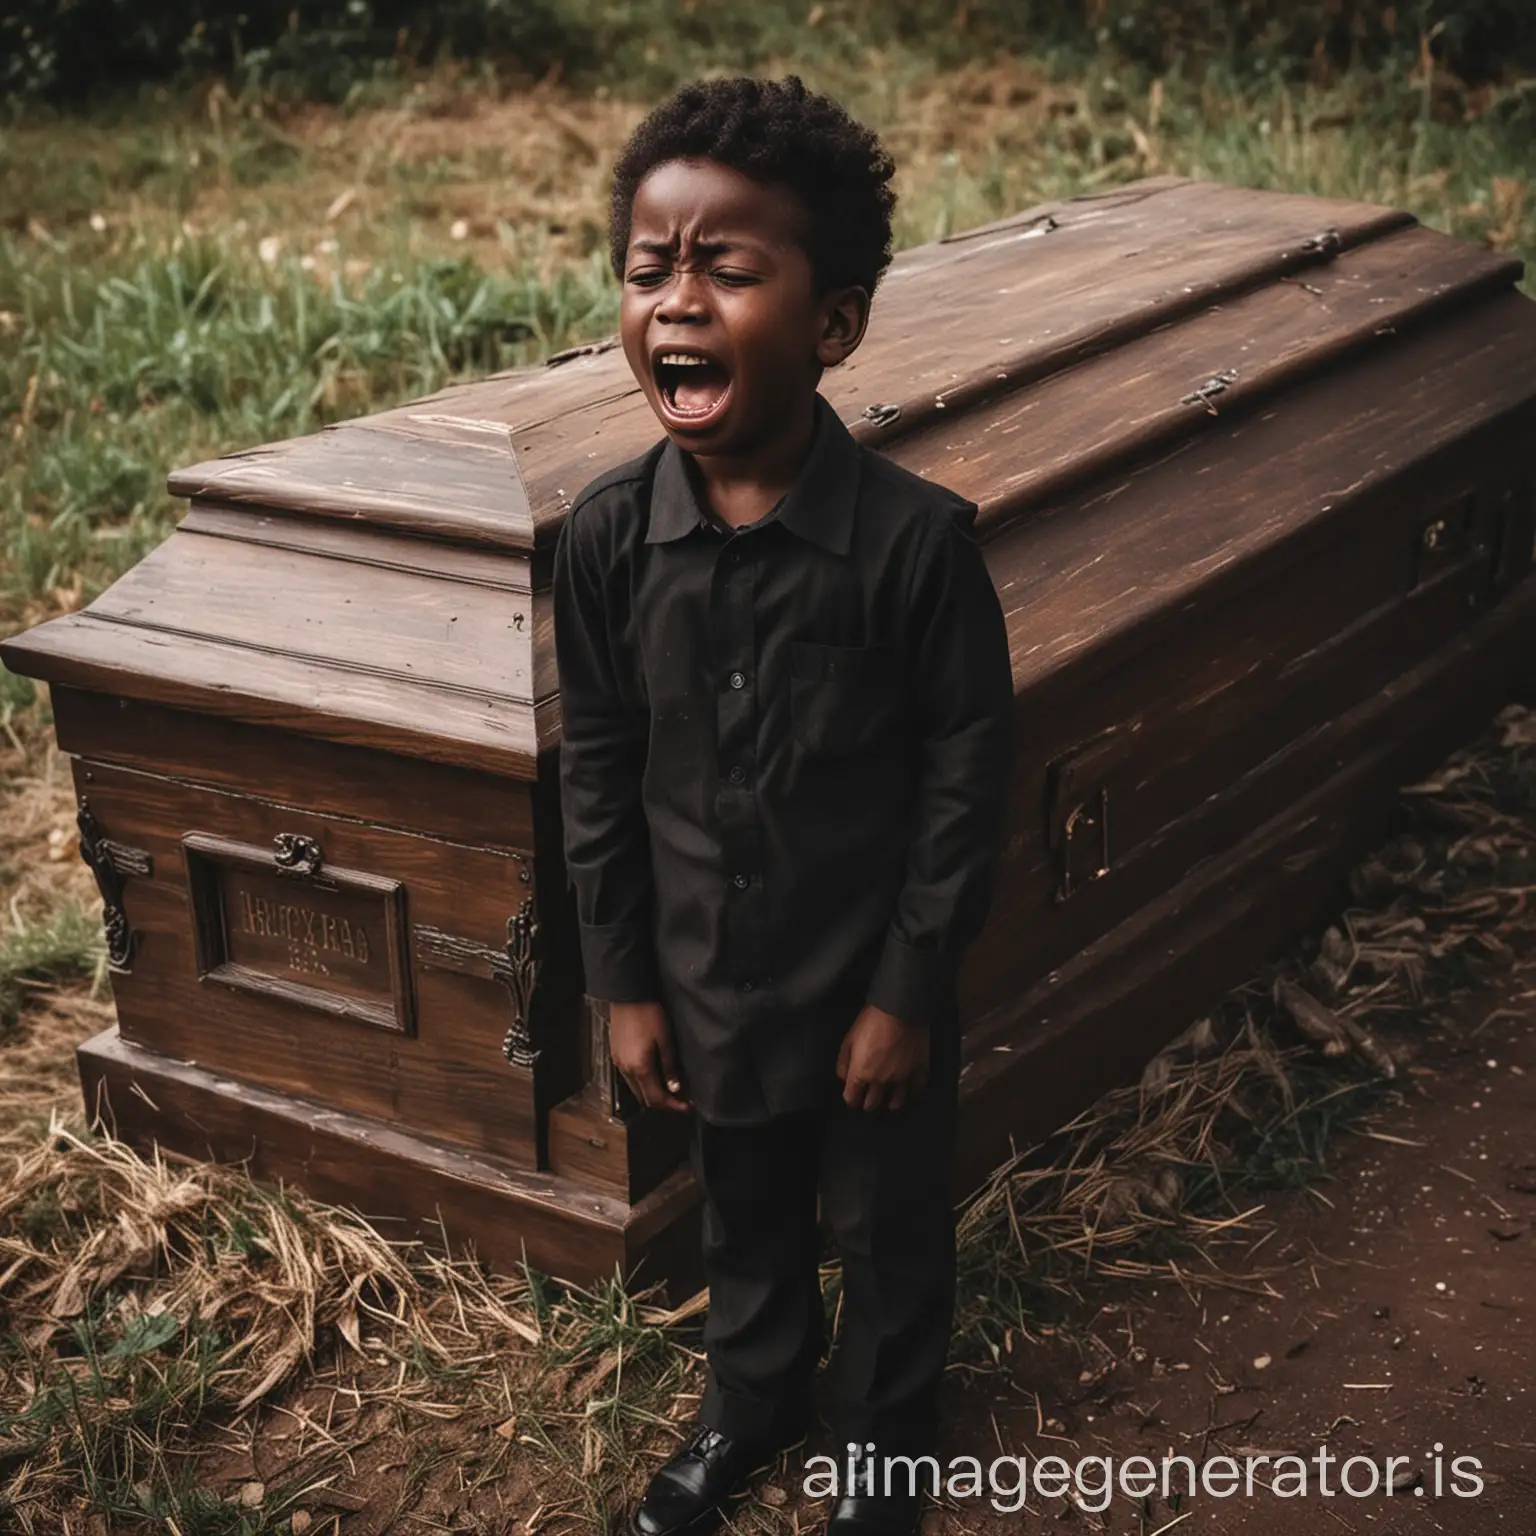 Give me a photo of a dark skin boy crying next to a Coffin box.
